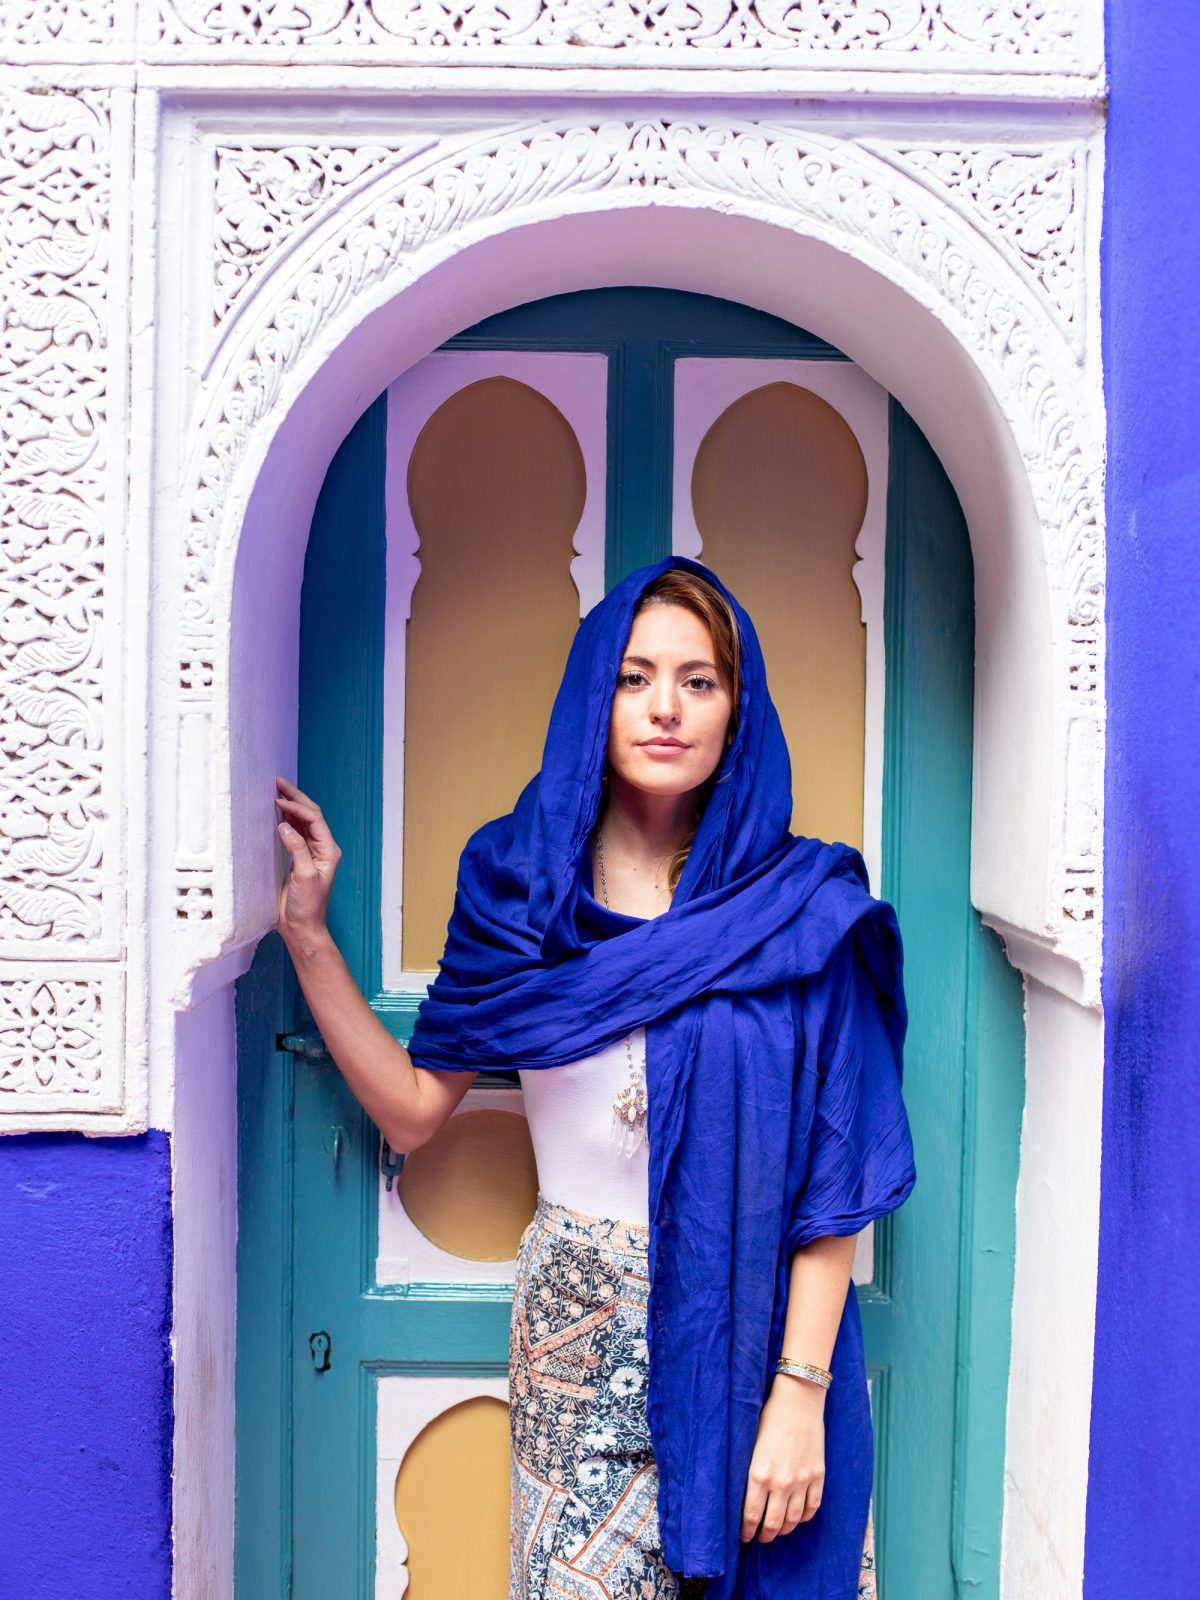 le jardin majorelle, ysl museum marrakech, musee yves saint laurent, what to do in marrakech, fashion on marrakech, what to do in morocco